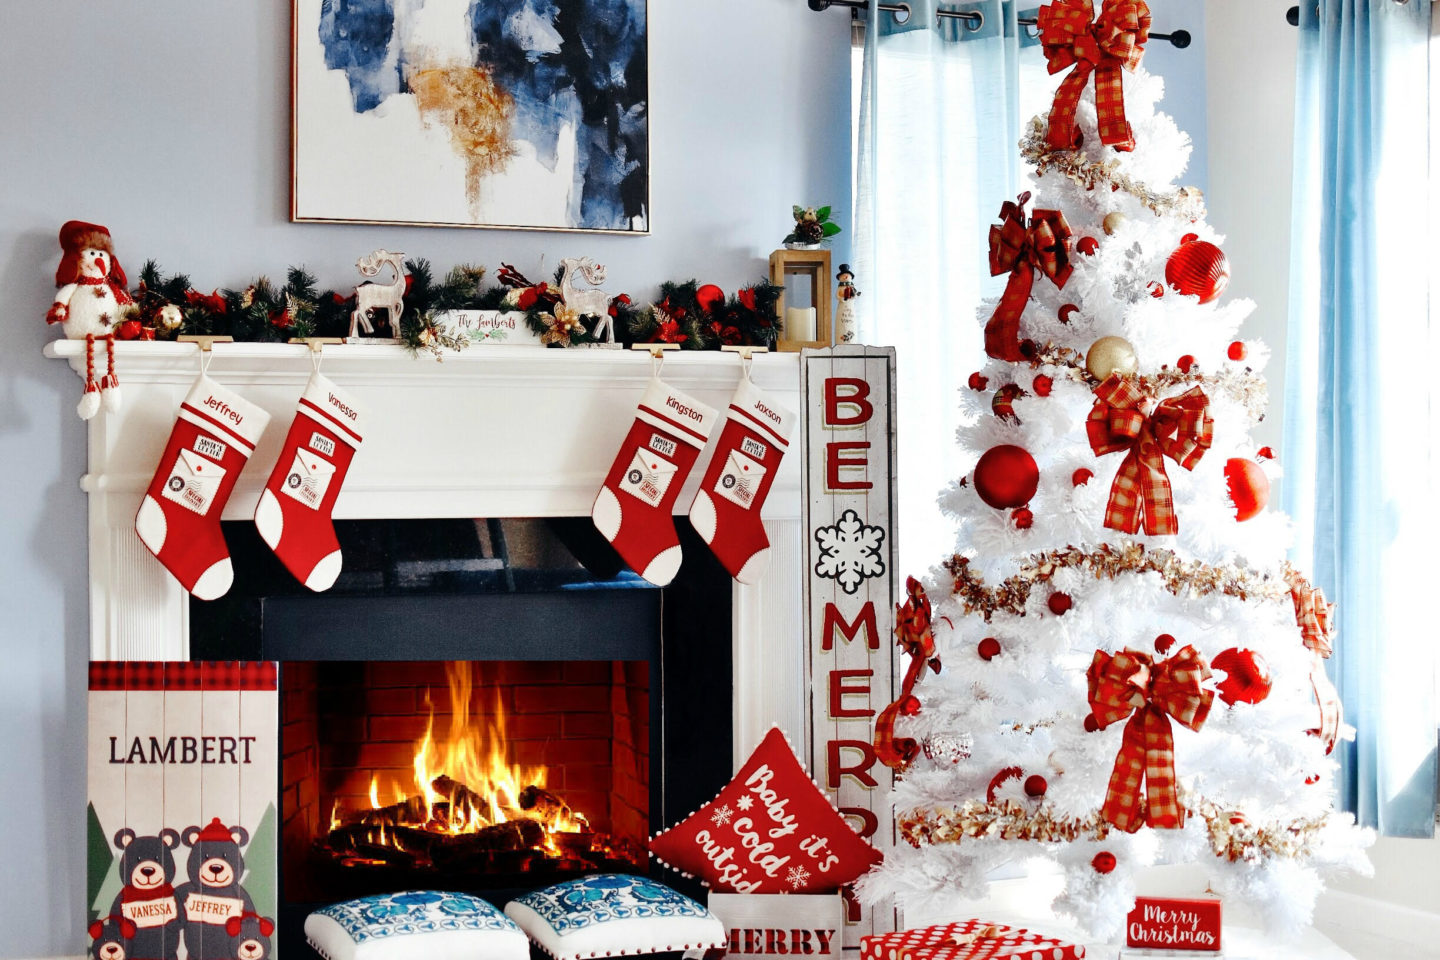  How-to-Decorate-Your-Home-Christmas-Perzonalization-Mall-Vanessa-Lambert-Blogger-WhatWouldVWear